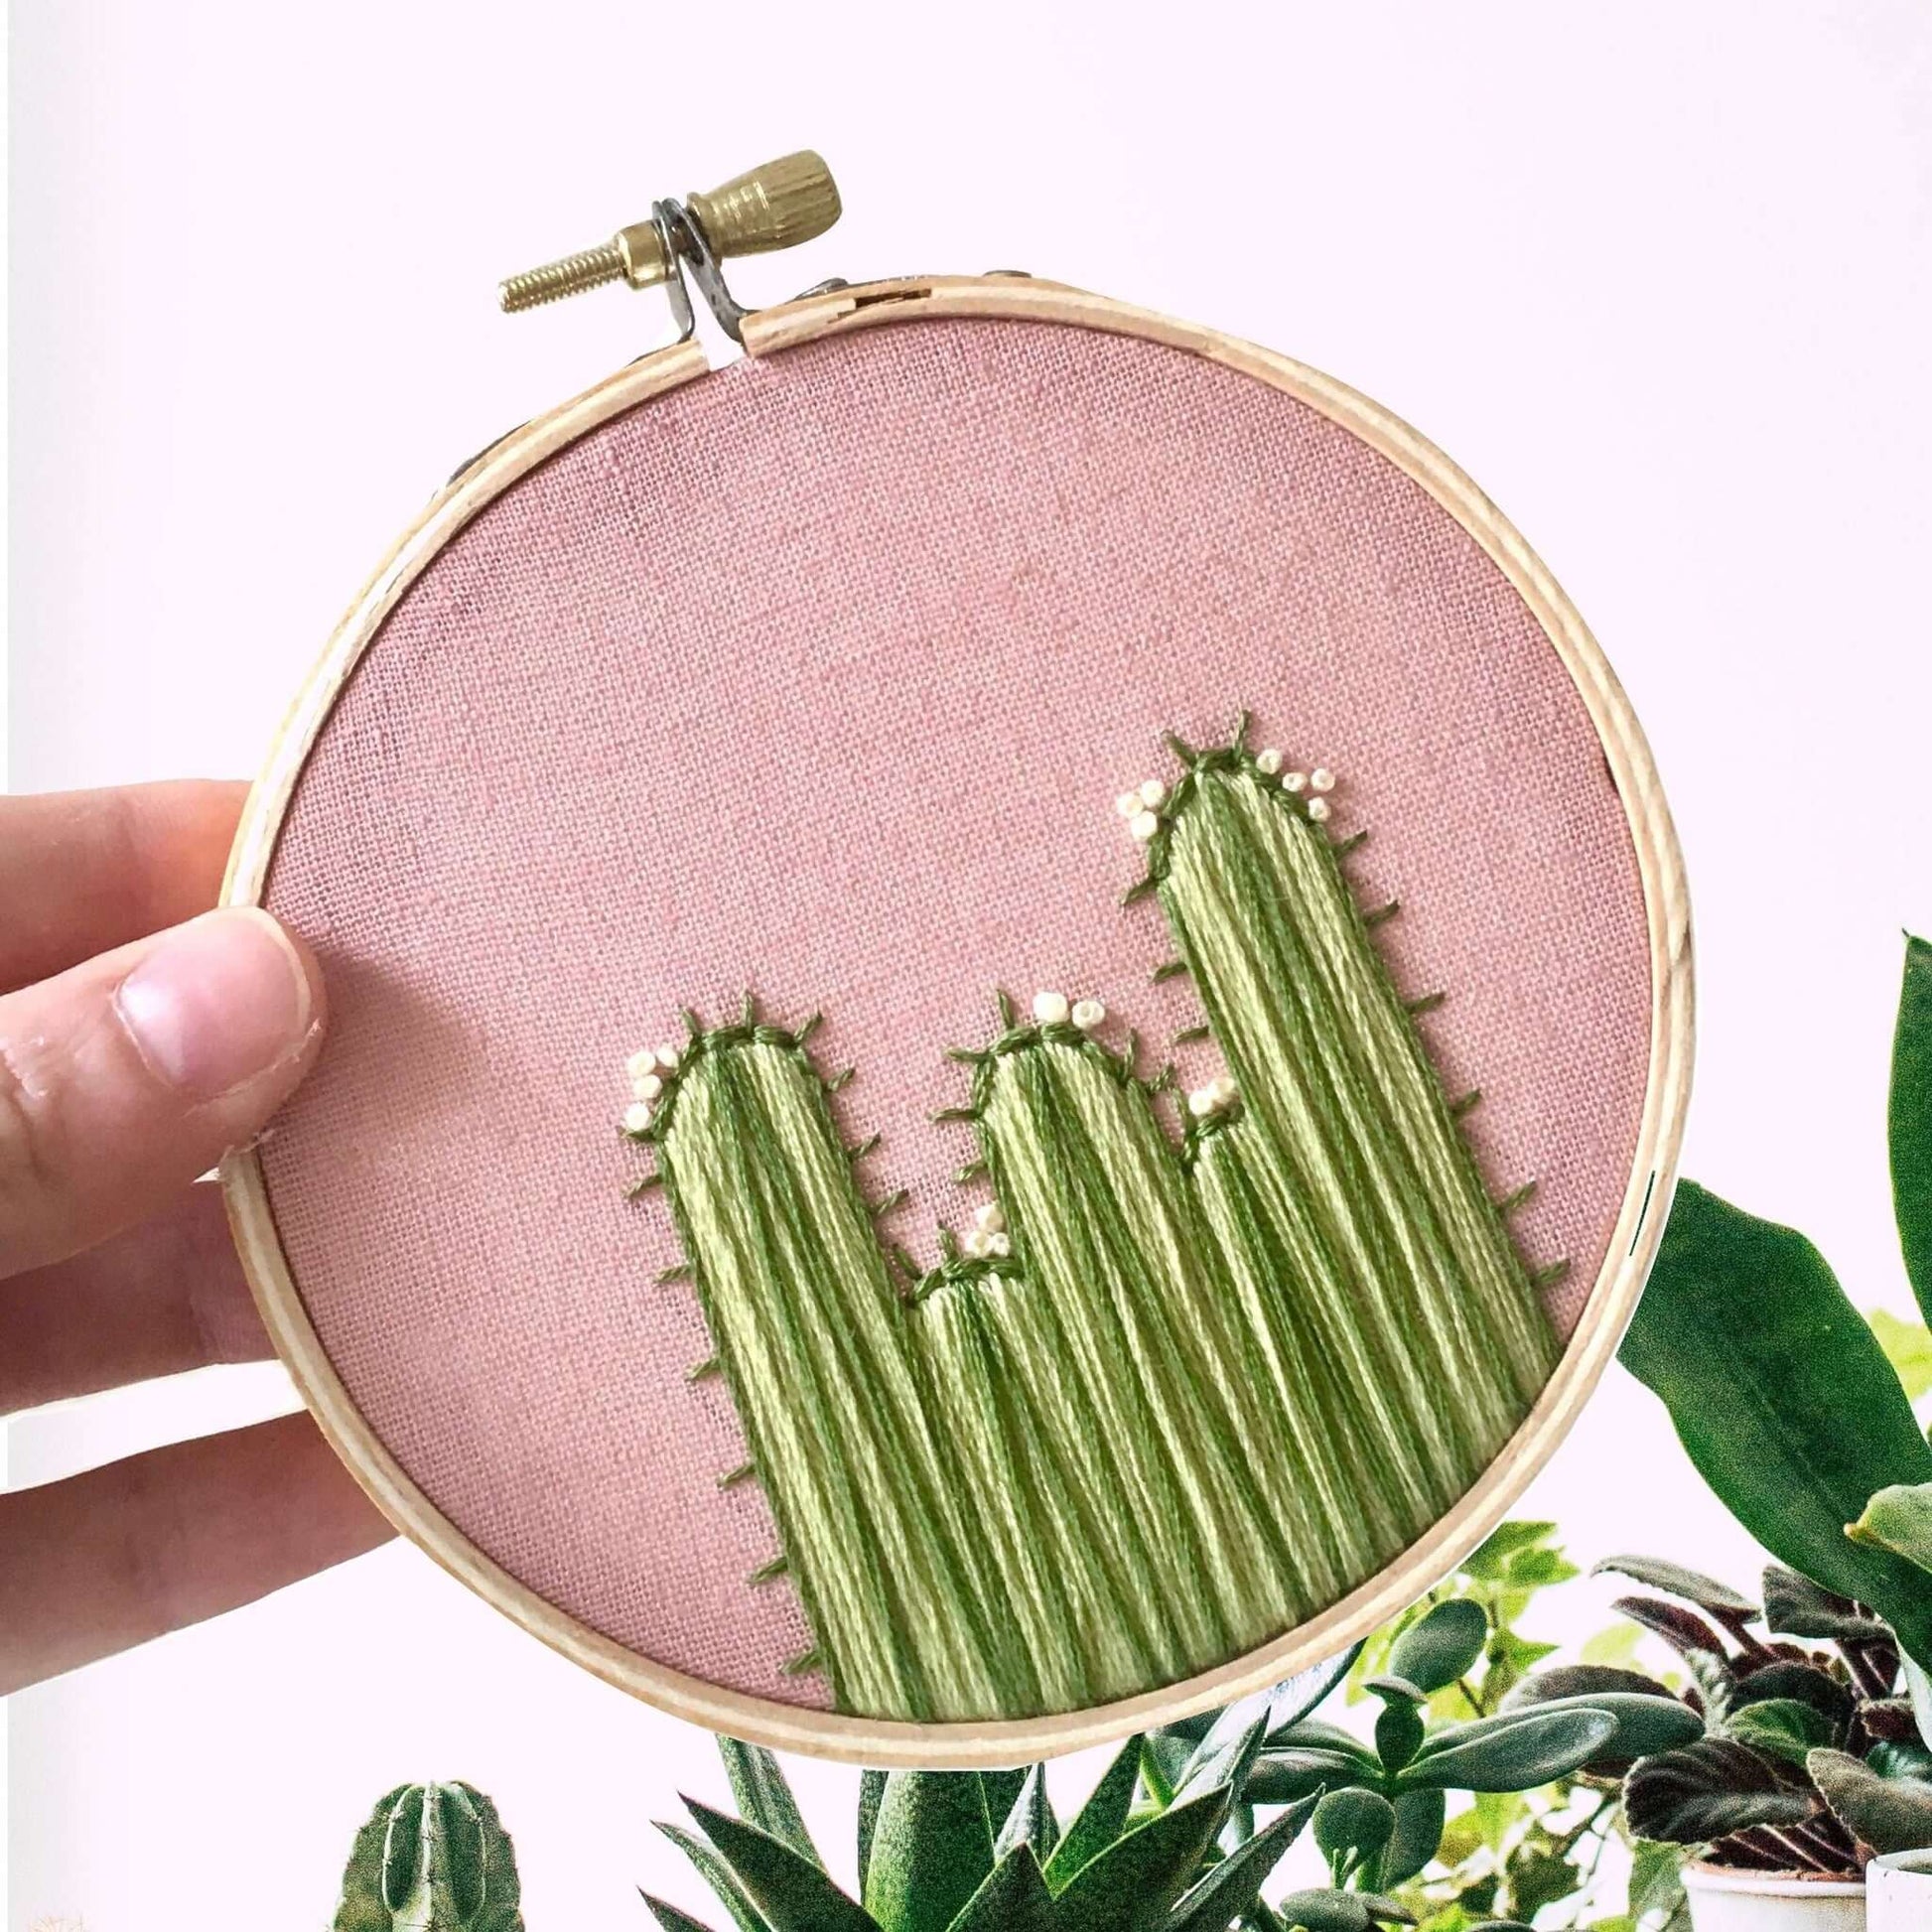 DIY Embroidery Kit Beginner Embroidery Kit Cactus 